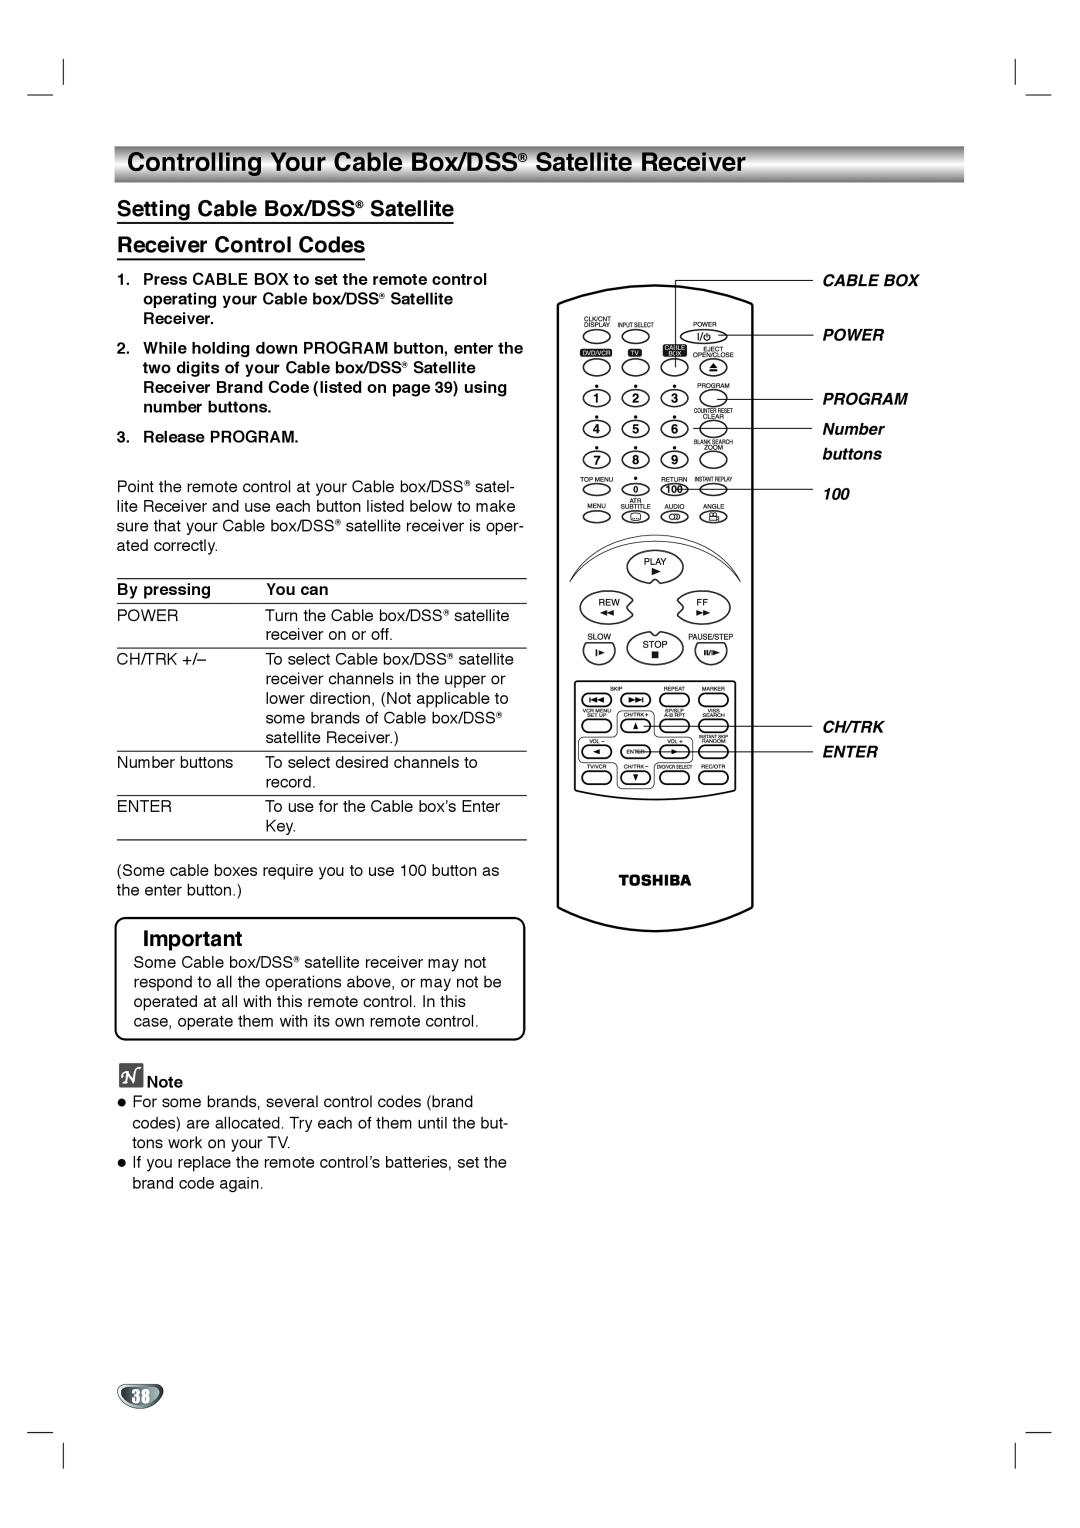 Toshiba SD-K530SU owner manual Controlling Your Cable Box/DSS Satellite Receiver, Setting Cable Box/DSS Satellite, Enter 